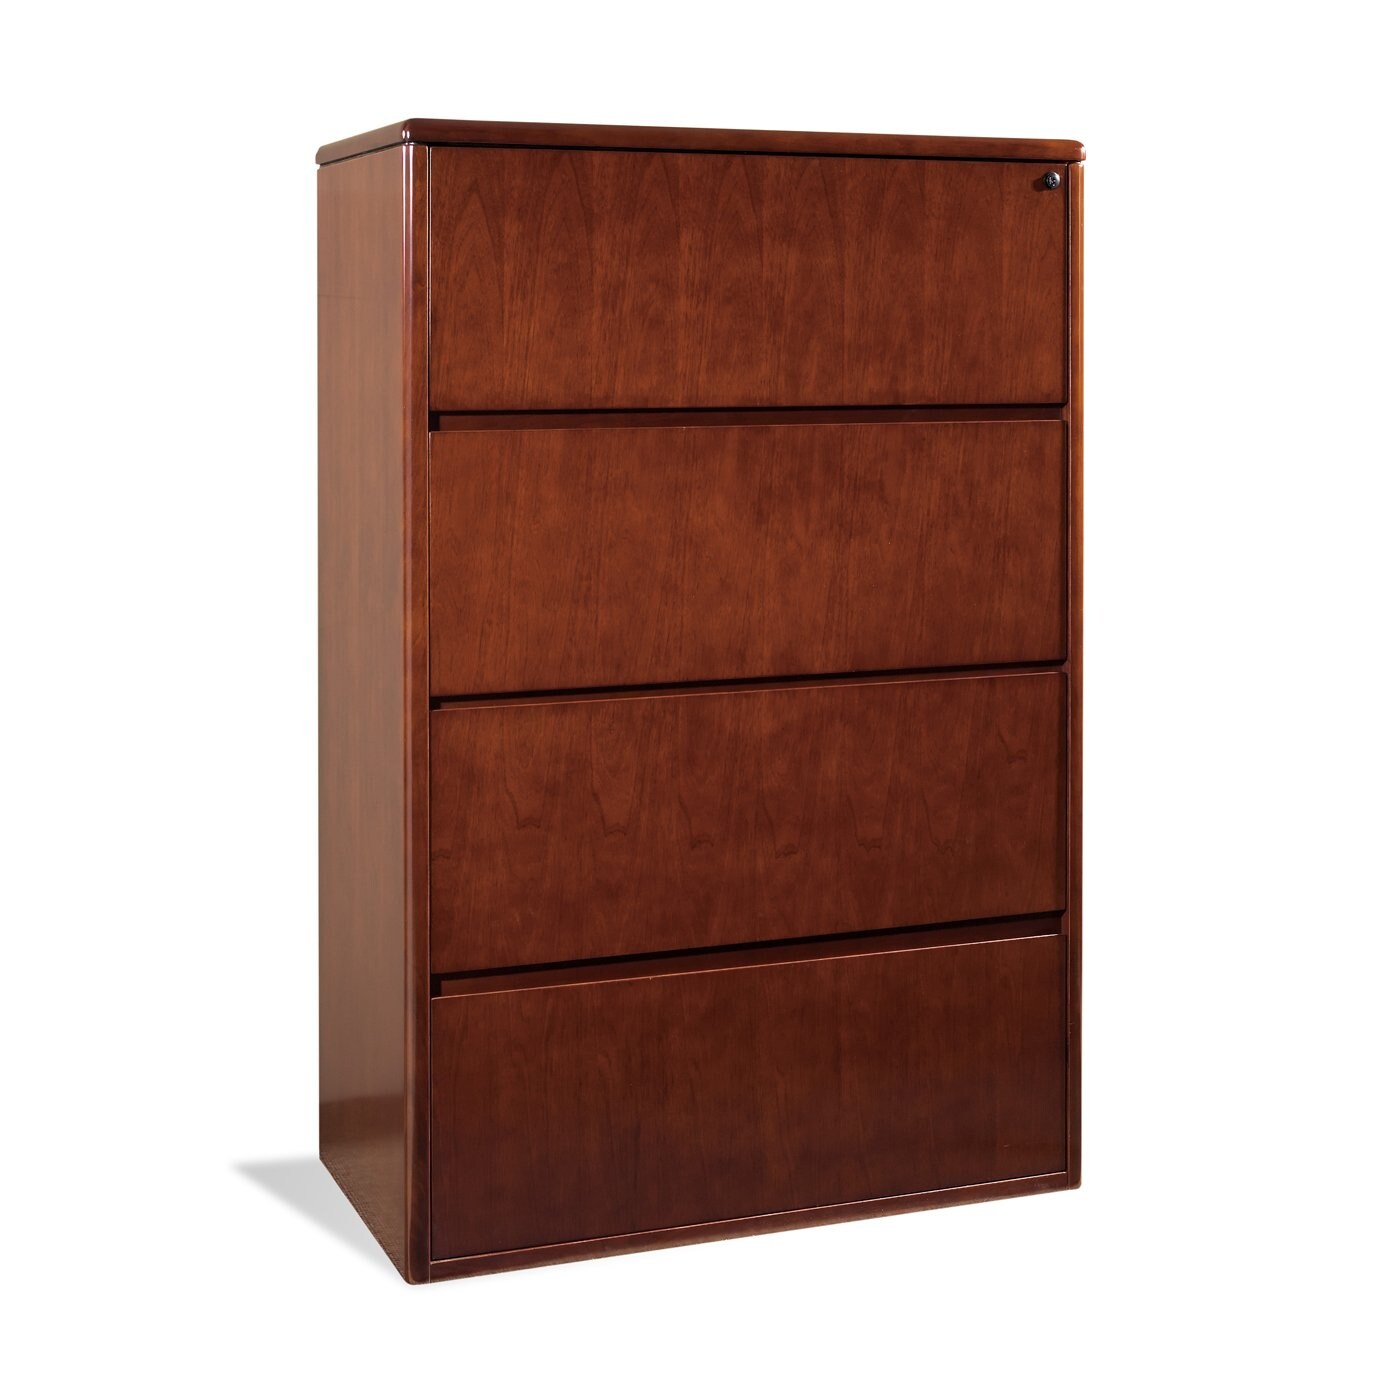 SON-109 - Sonoma 4 Drawer Lateral File Cabinet by Office Star